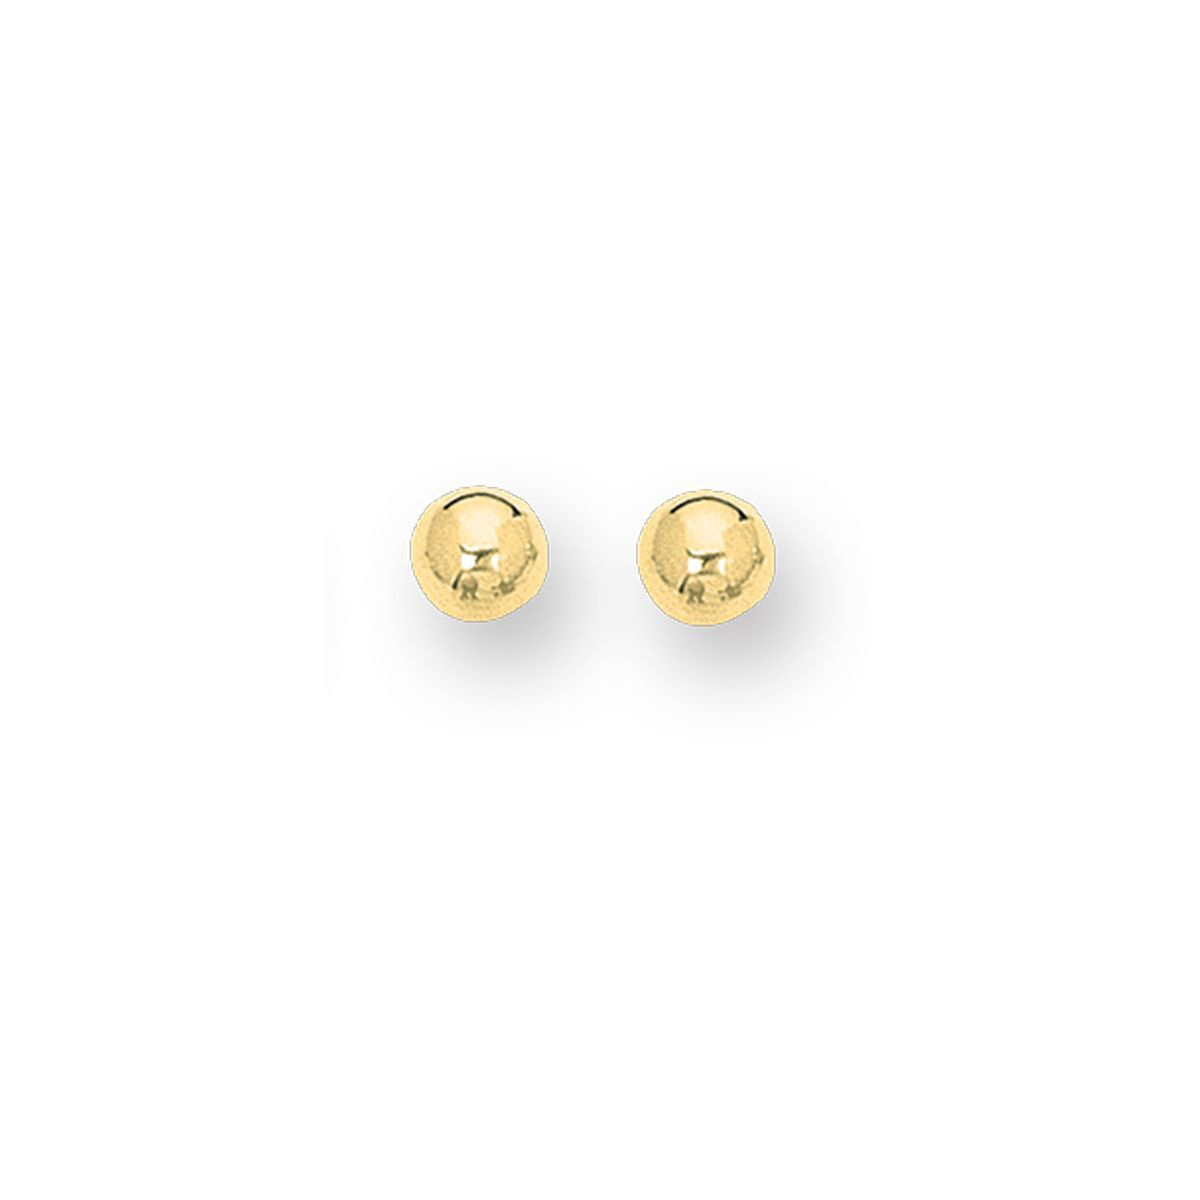 14 Karat Yellow Gold 6mm Ball Earrings  Post And Friction Backs.